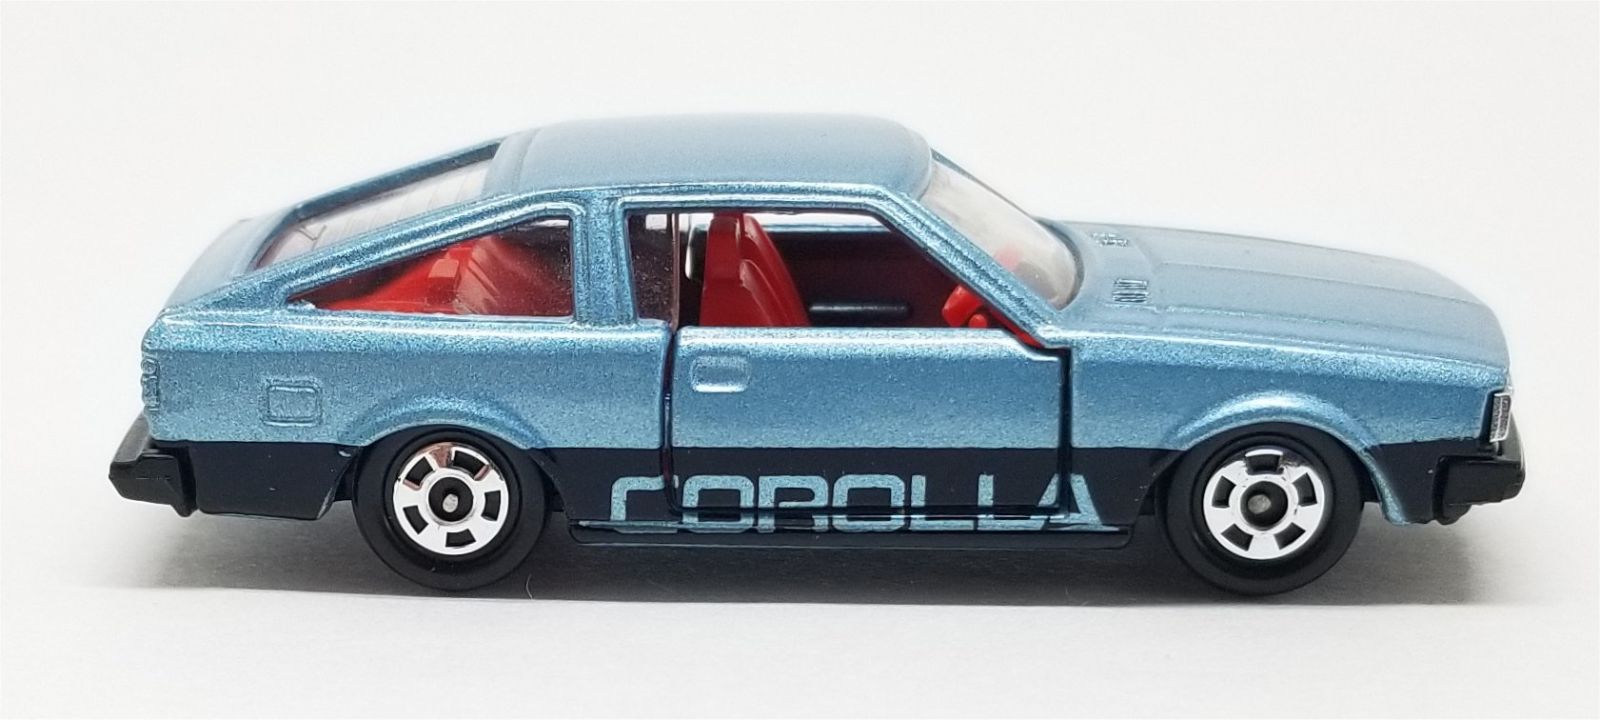 Illustration for article titled [REVIEW] Tomica Toyota Corolla Levin